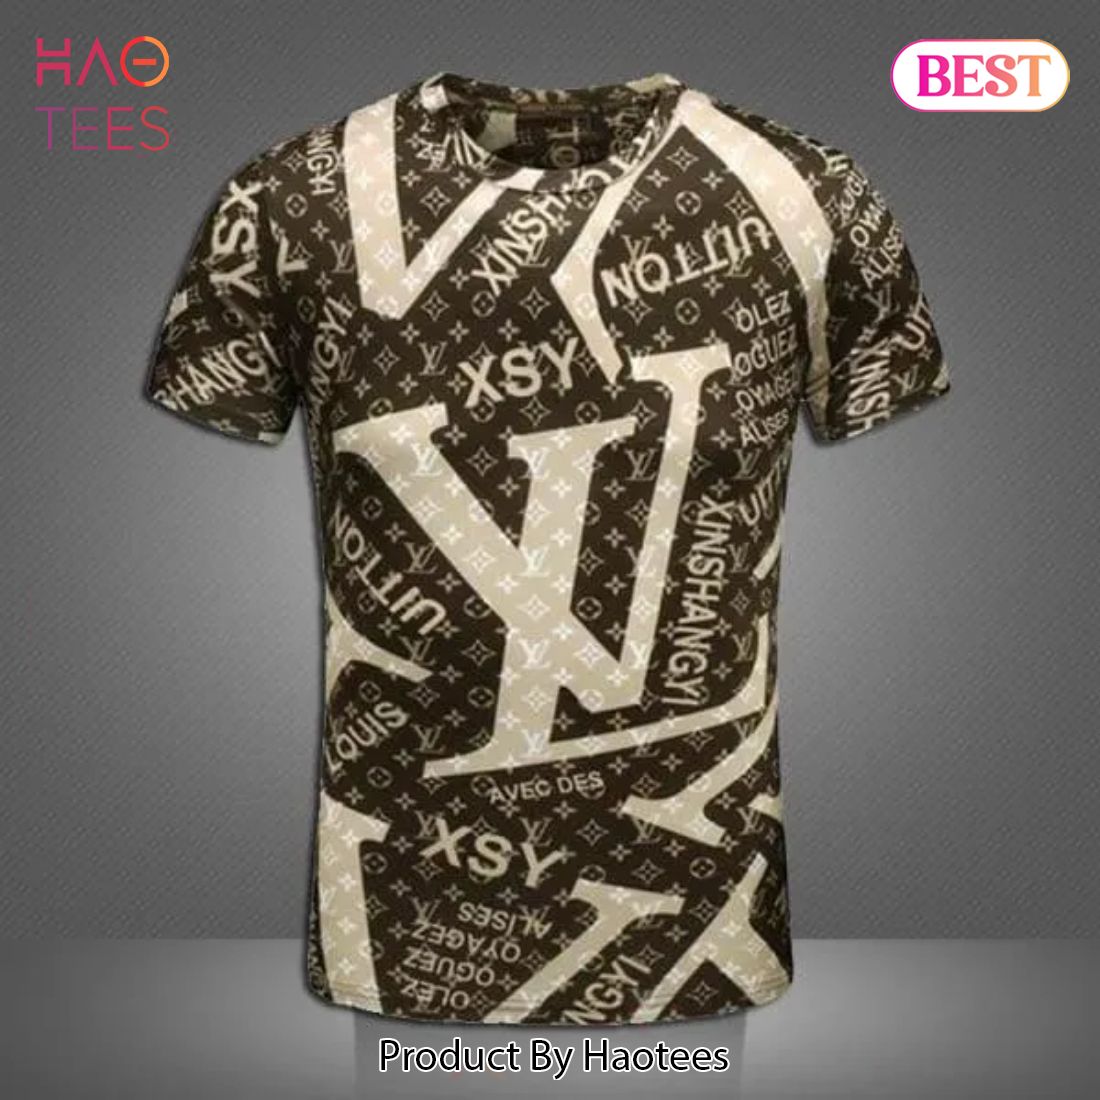 NEW FASHION] Louis Vuitton Premium Luxury Brand T-Shirt Outfit For